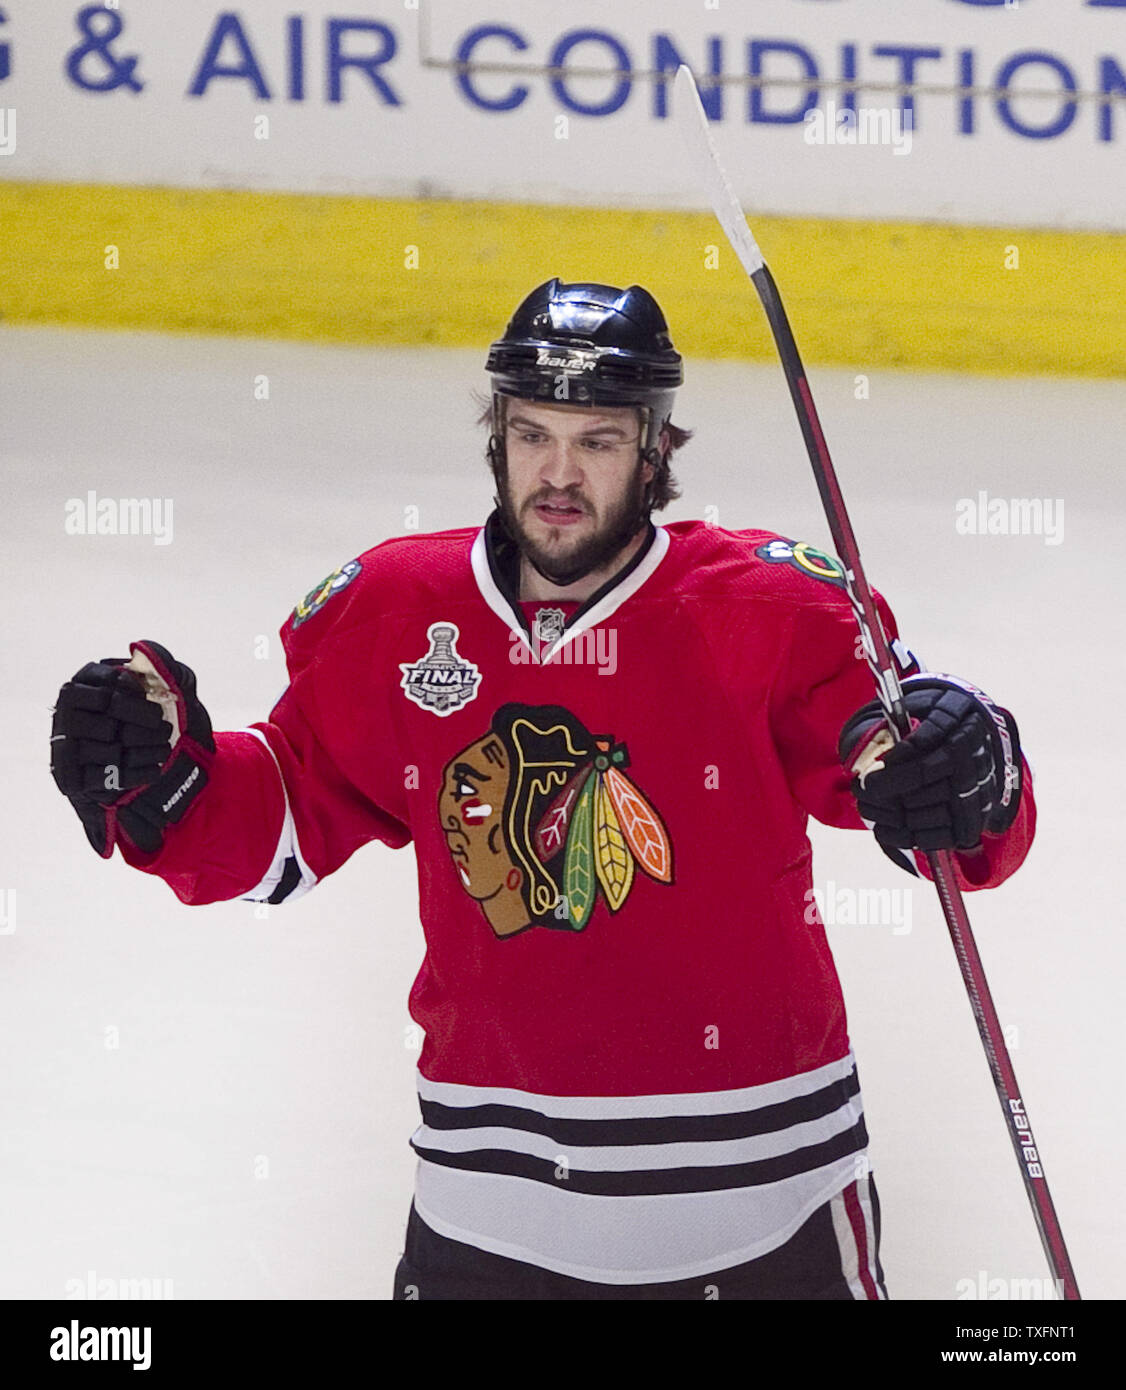 Brent Seabrook's Iconic Hairstyle at Soldier Field